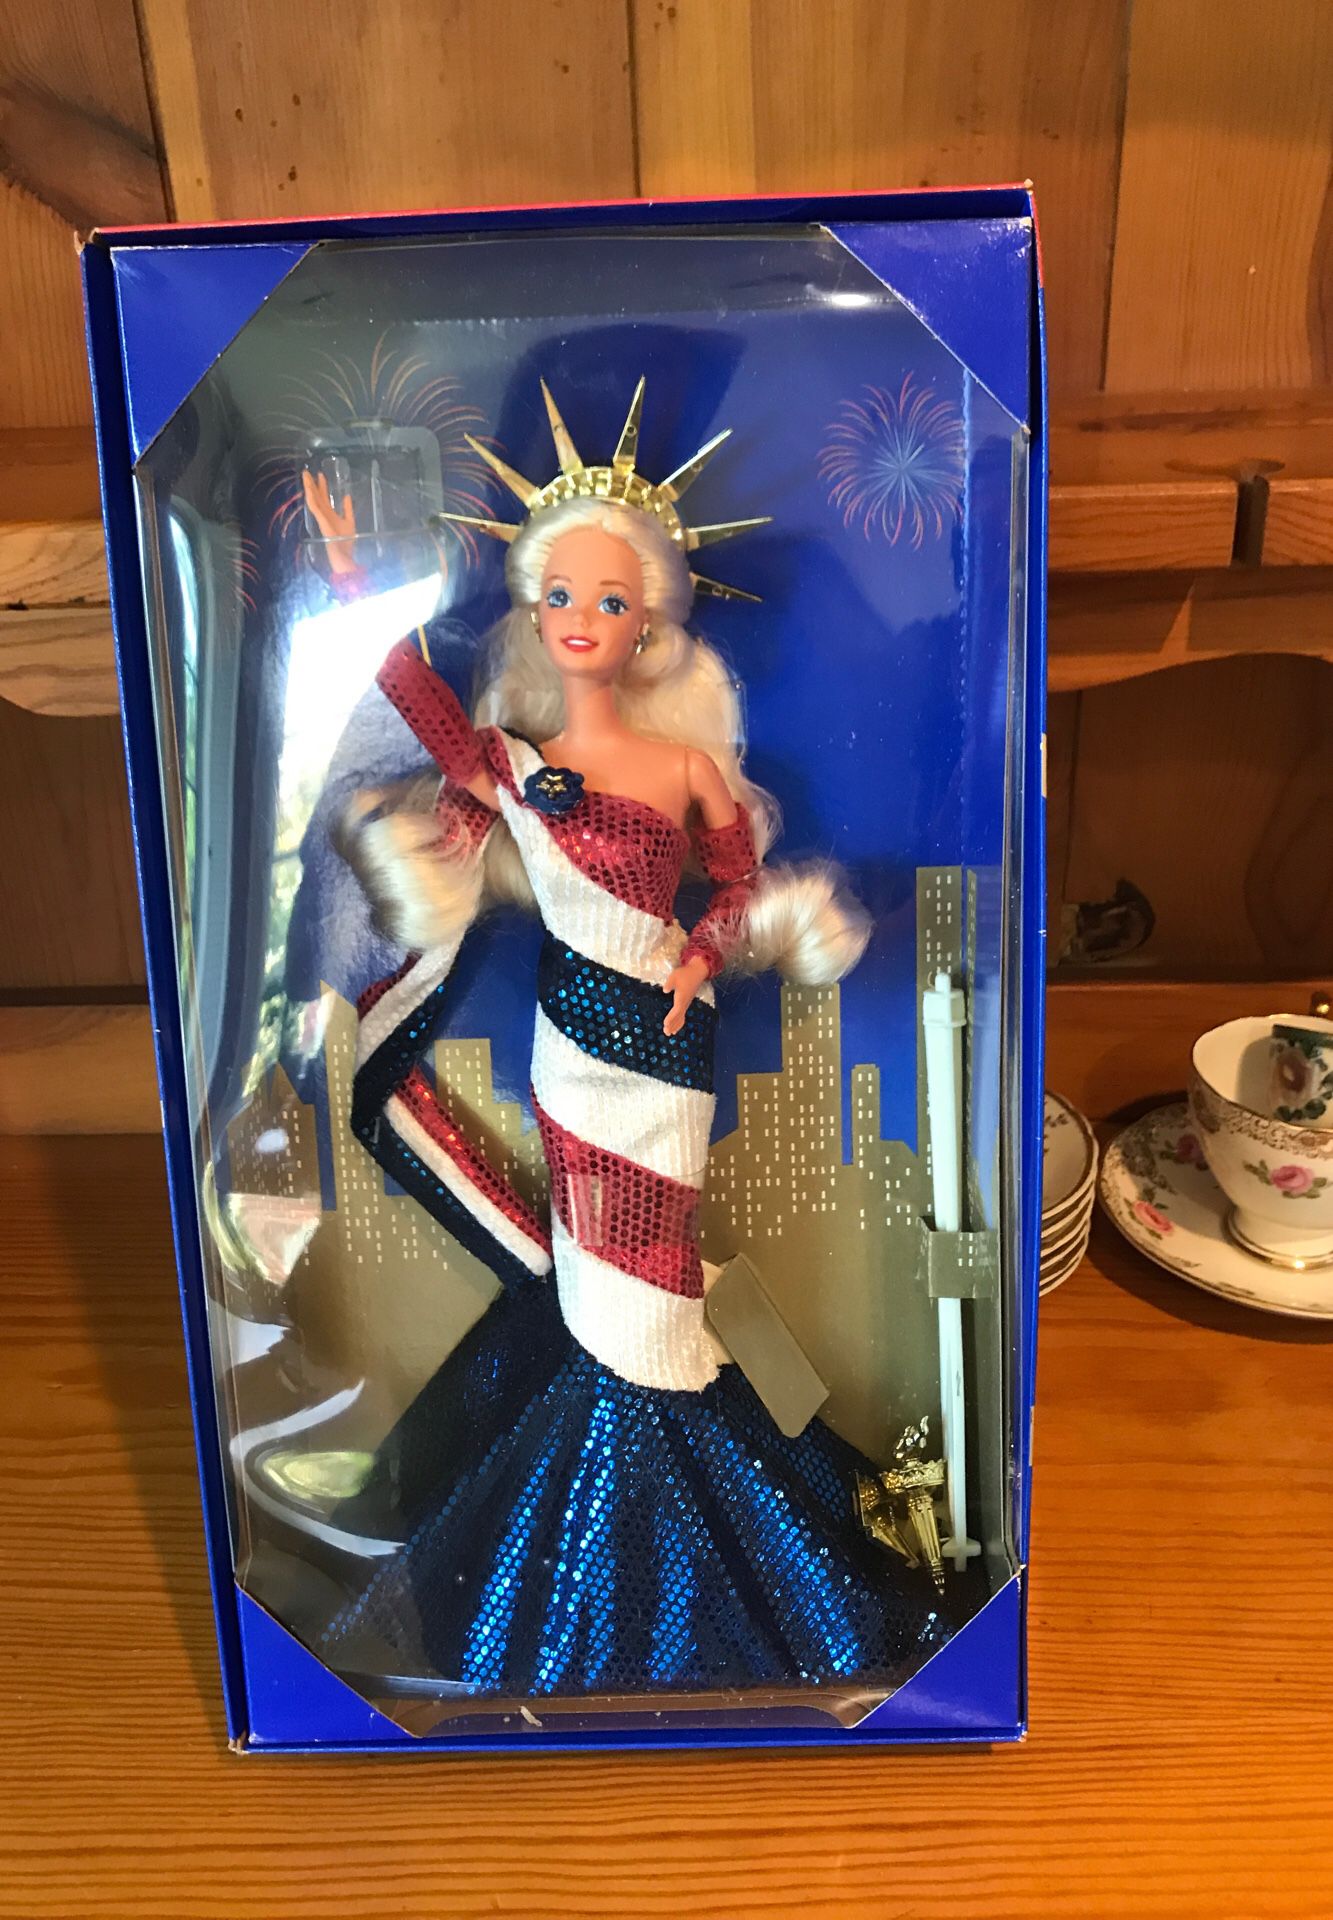 Statue of Liberty Barbie & collector plate!